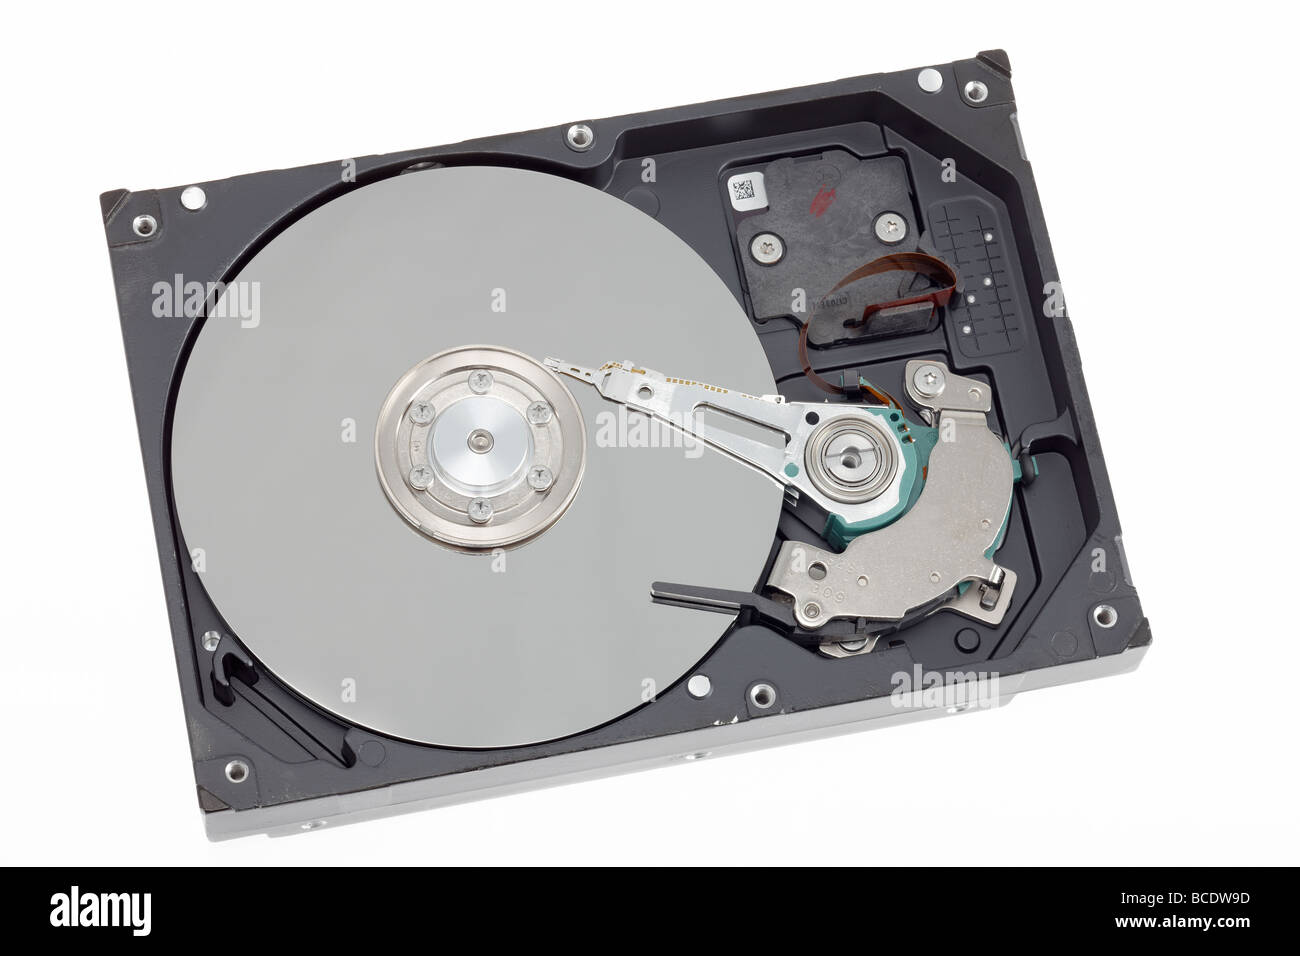 Computer hard disk with cover removed. Stock Photo